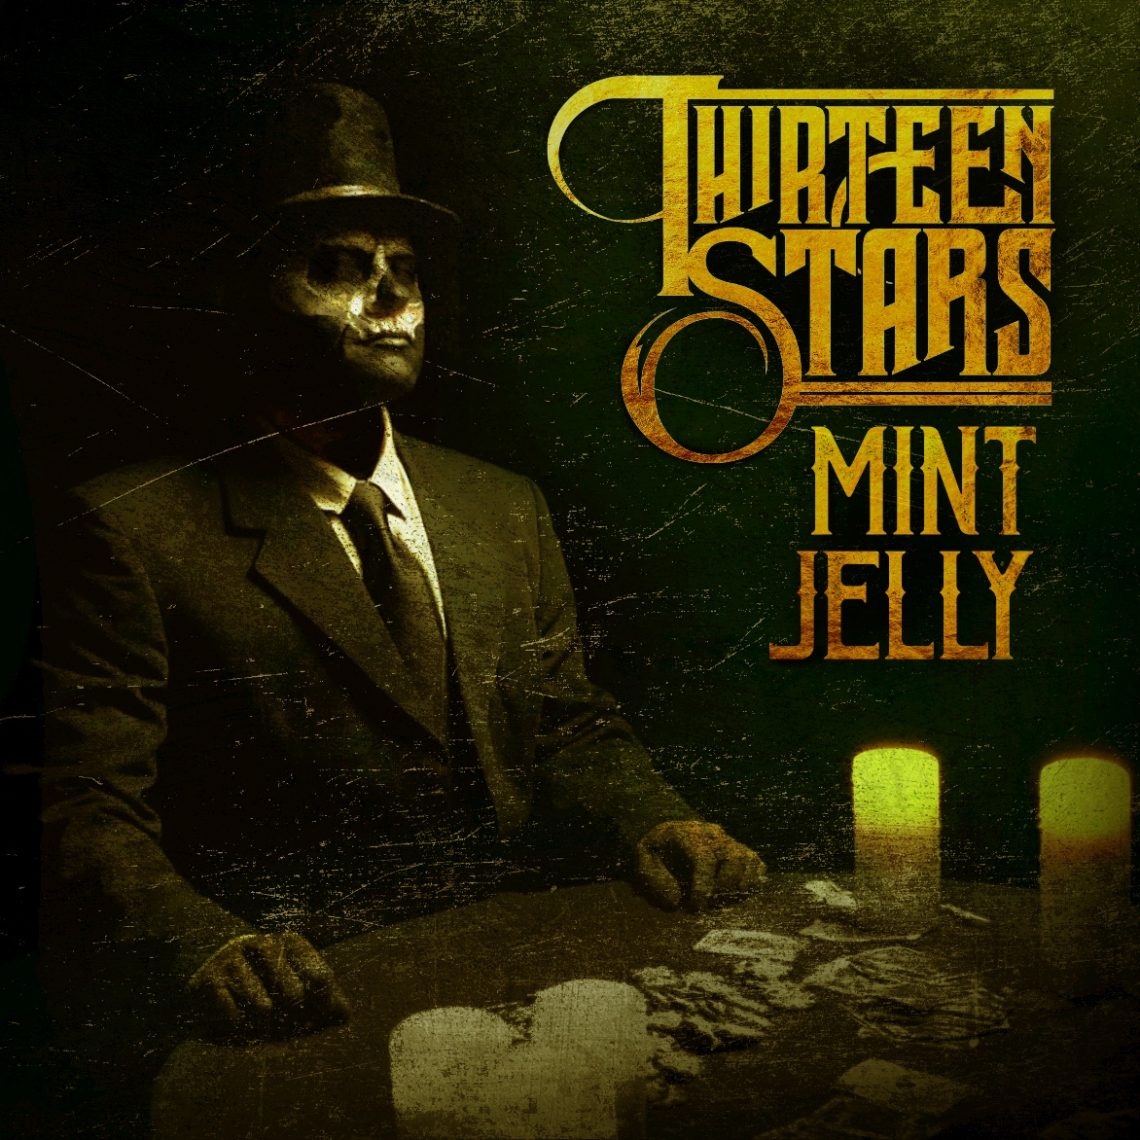 Thirteen Stars premiere new single and music video ‘Mint Jelly’ ahead of Black Aces UK Tour, plus appearances at HRH Blues, Call of the Wild, and Wildfire Festival